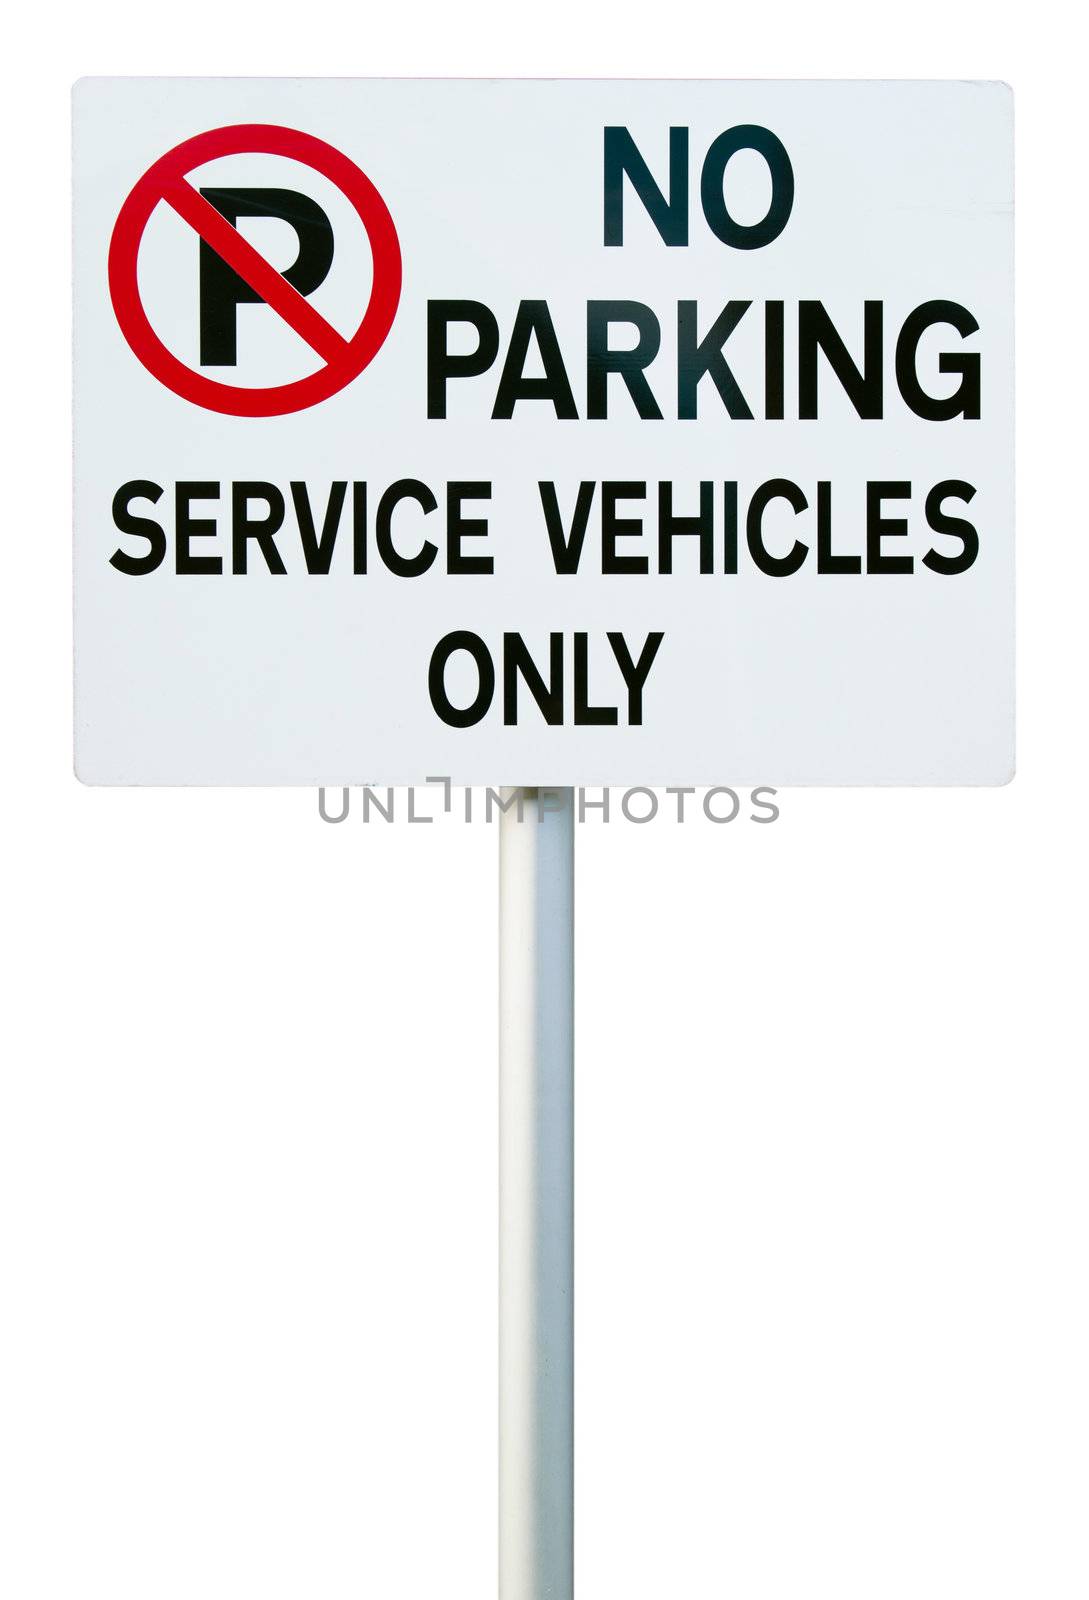 no parking sign (service vehicles only) isolated on white background